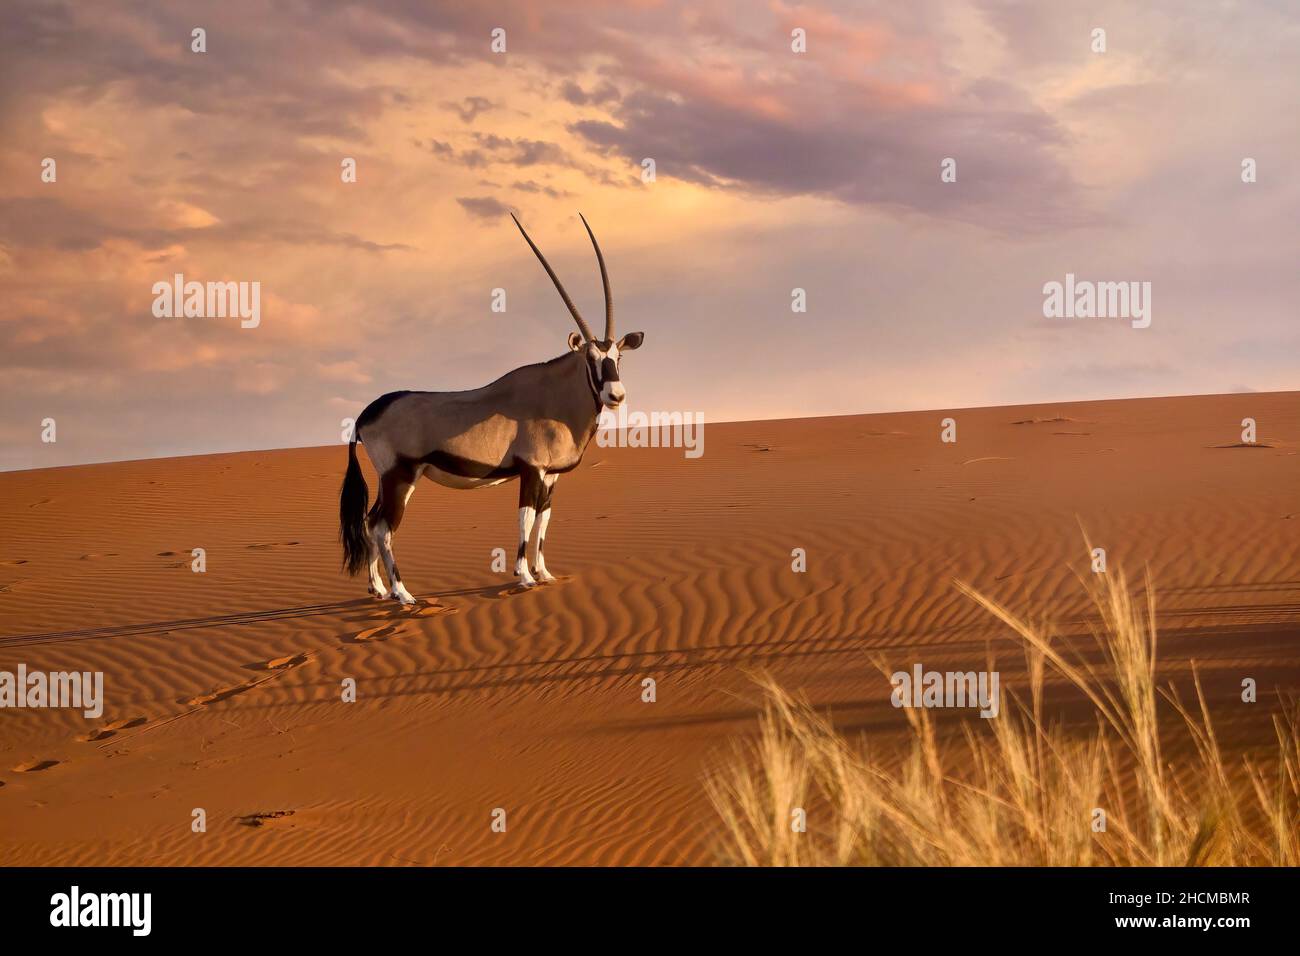 Side view of a beautiful oryx (Oryx gazella) standing near the ridge of a red sand dune at sunset in Sossusvlei, the Namib Desert, Namibia. Stock Photo